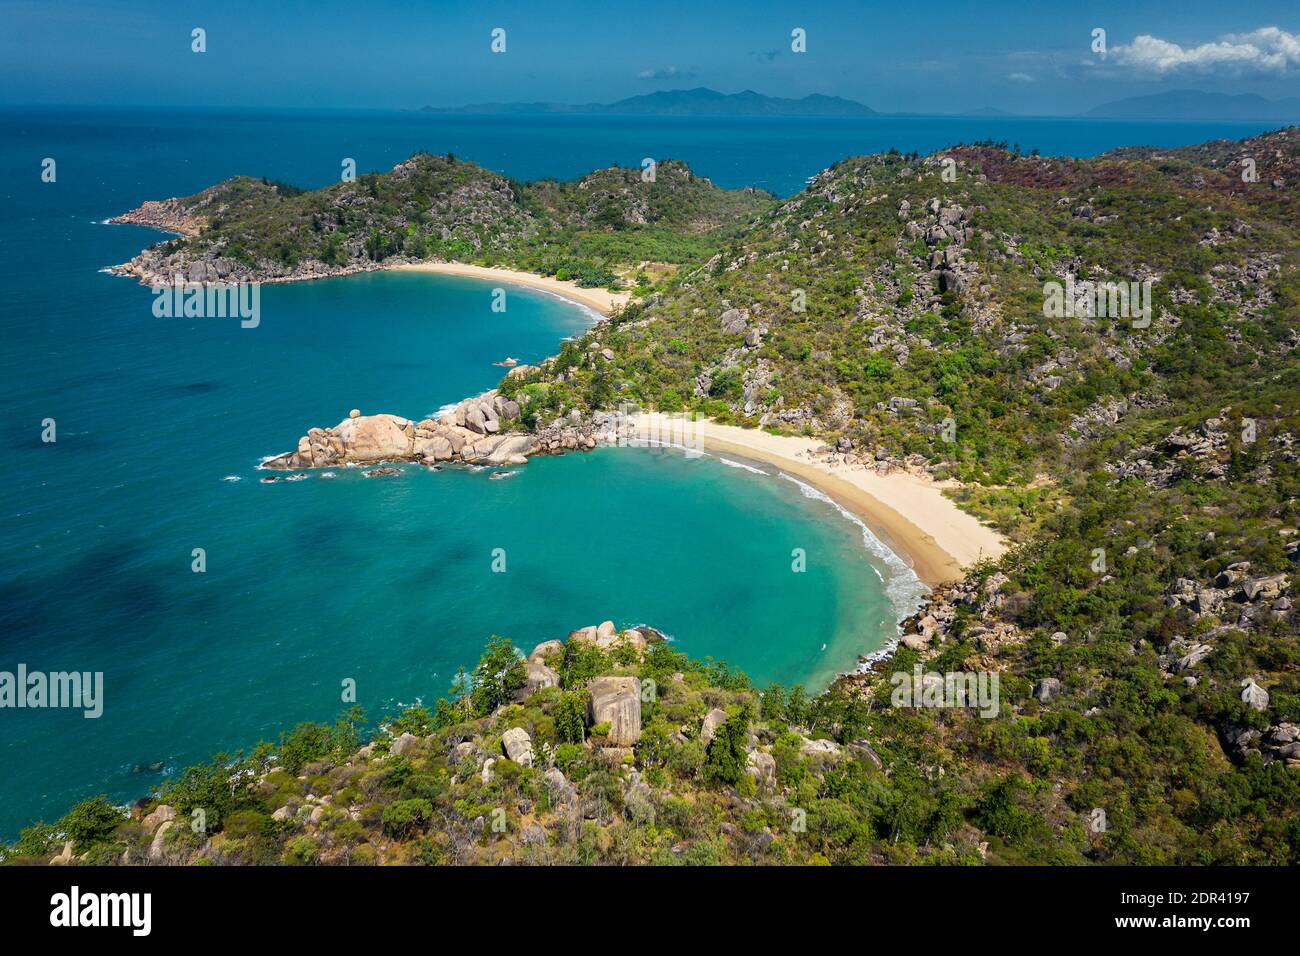 Aerial shot of Balding Bay and Radical Bay on famous Magnetic Island. Stock Photo